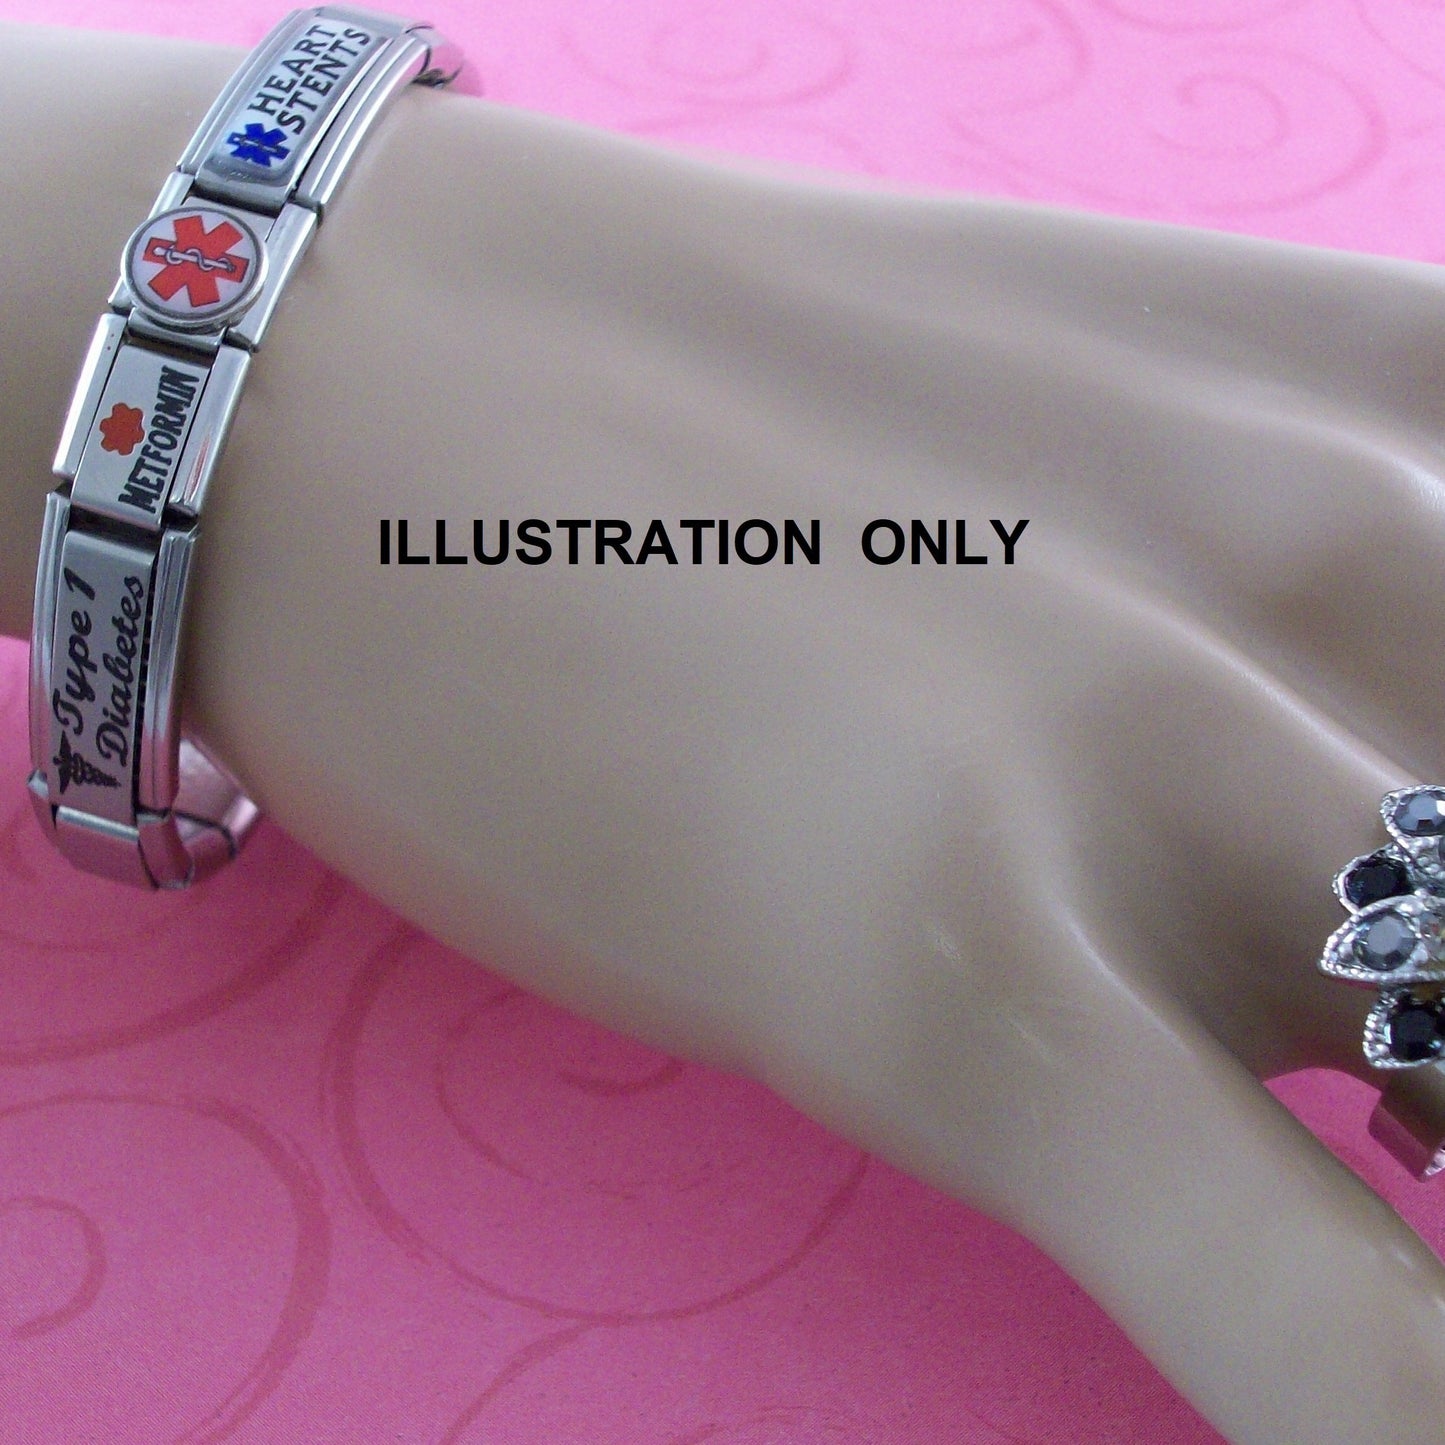 Heart Valve Replacement Medical Bracelet Italian Charm by Gadow Jewelry